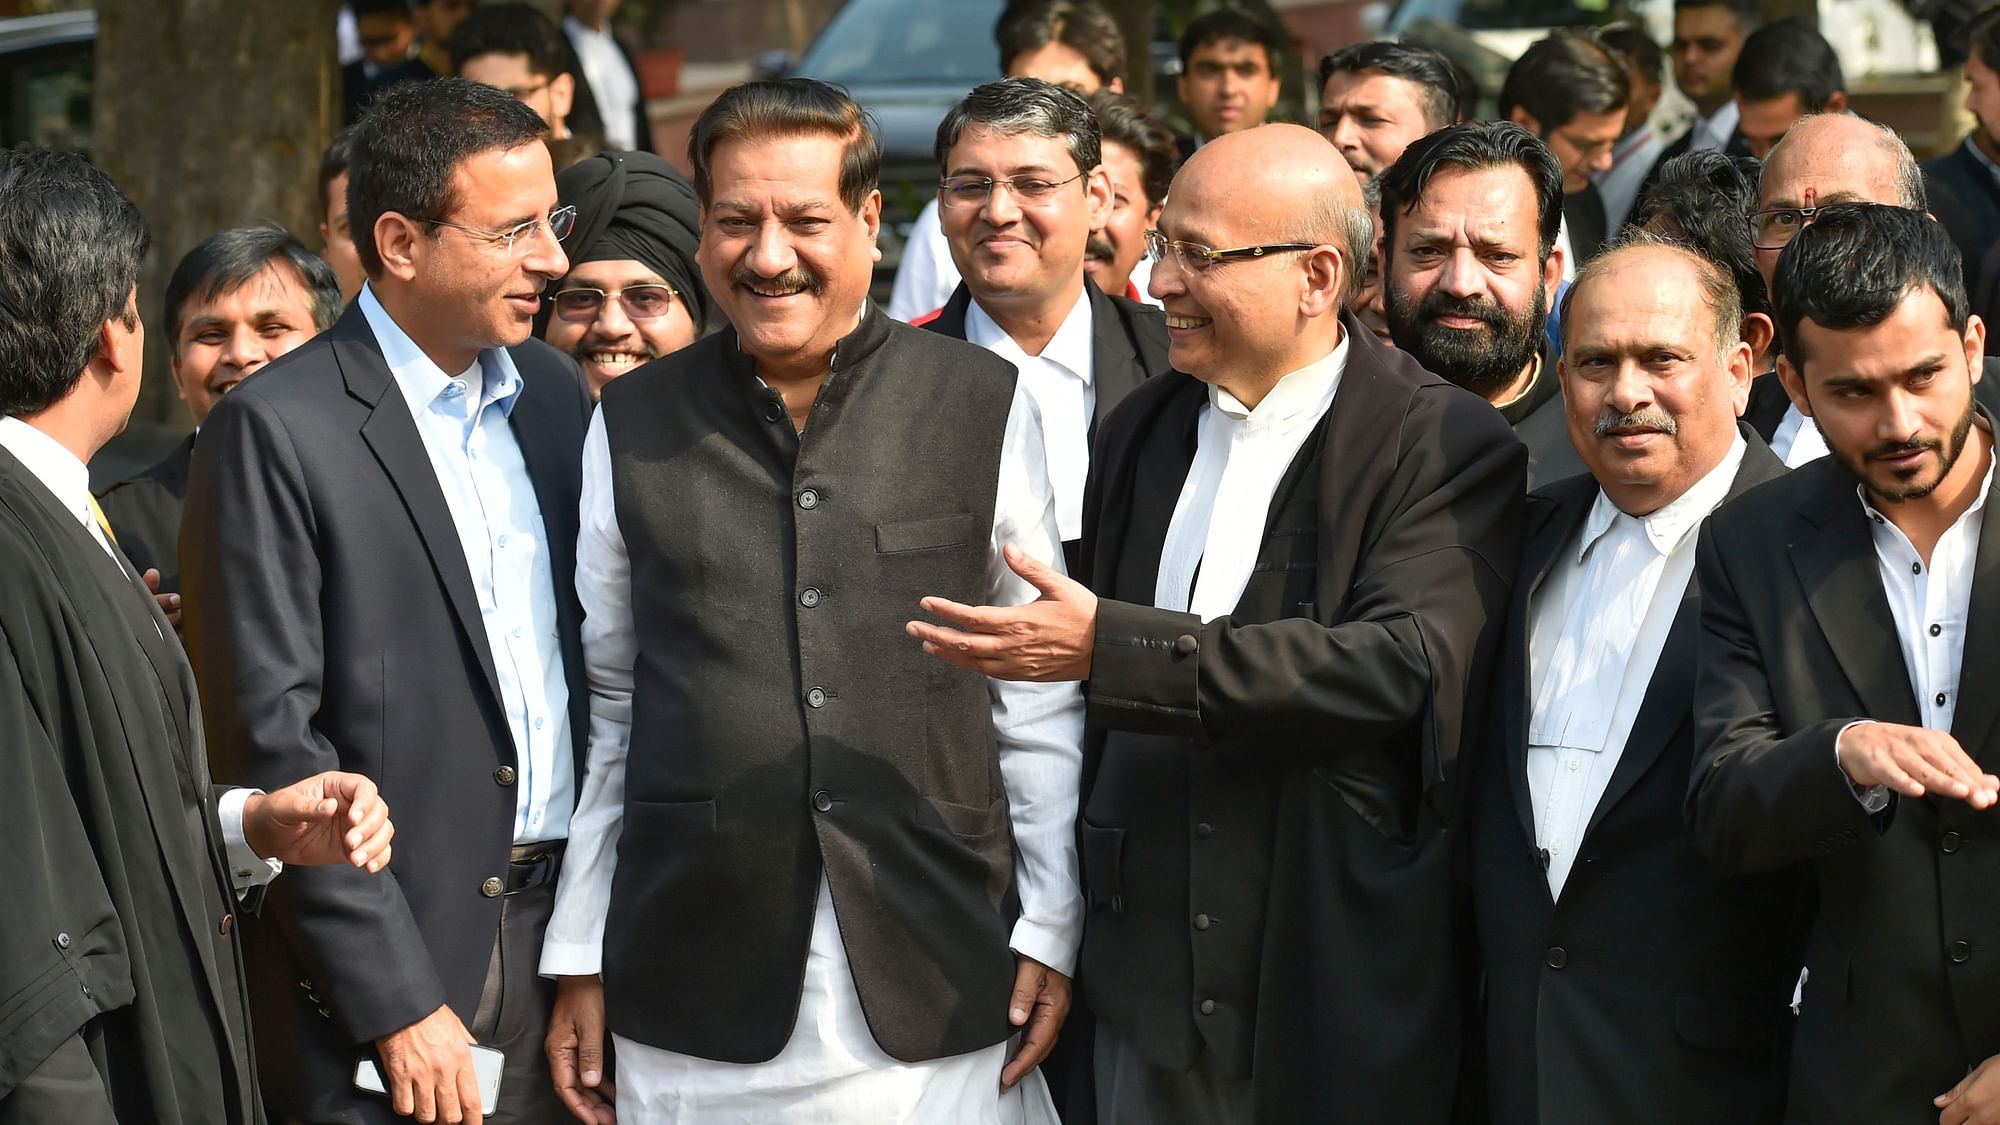  Senior advocate AM Singhvi and Congress leader Randeep Surjewala after the Supreme Court hearing on 24 November.&nbsp;